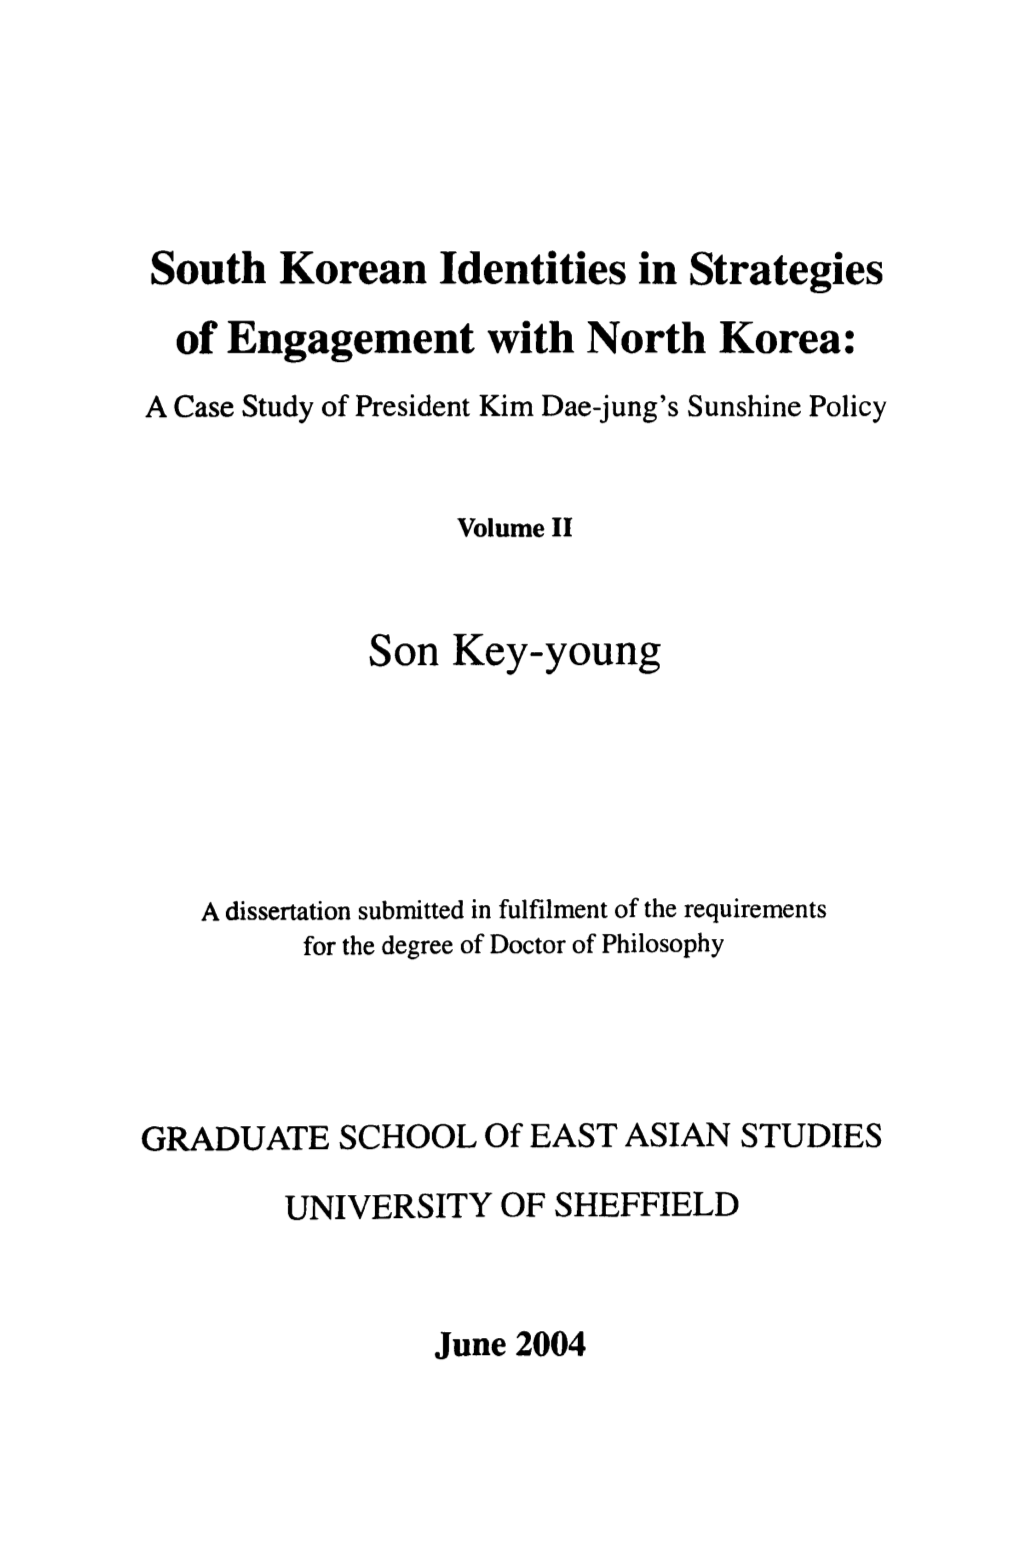 South Korean Identities in Strategies of Engagement with North Korea: a Case Study of President Kim Dae-Jung's Sunshine Policy